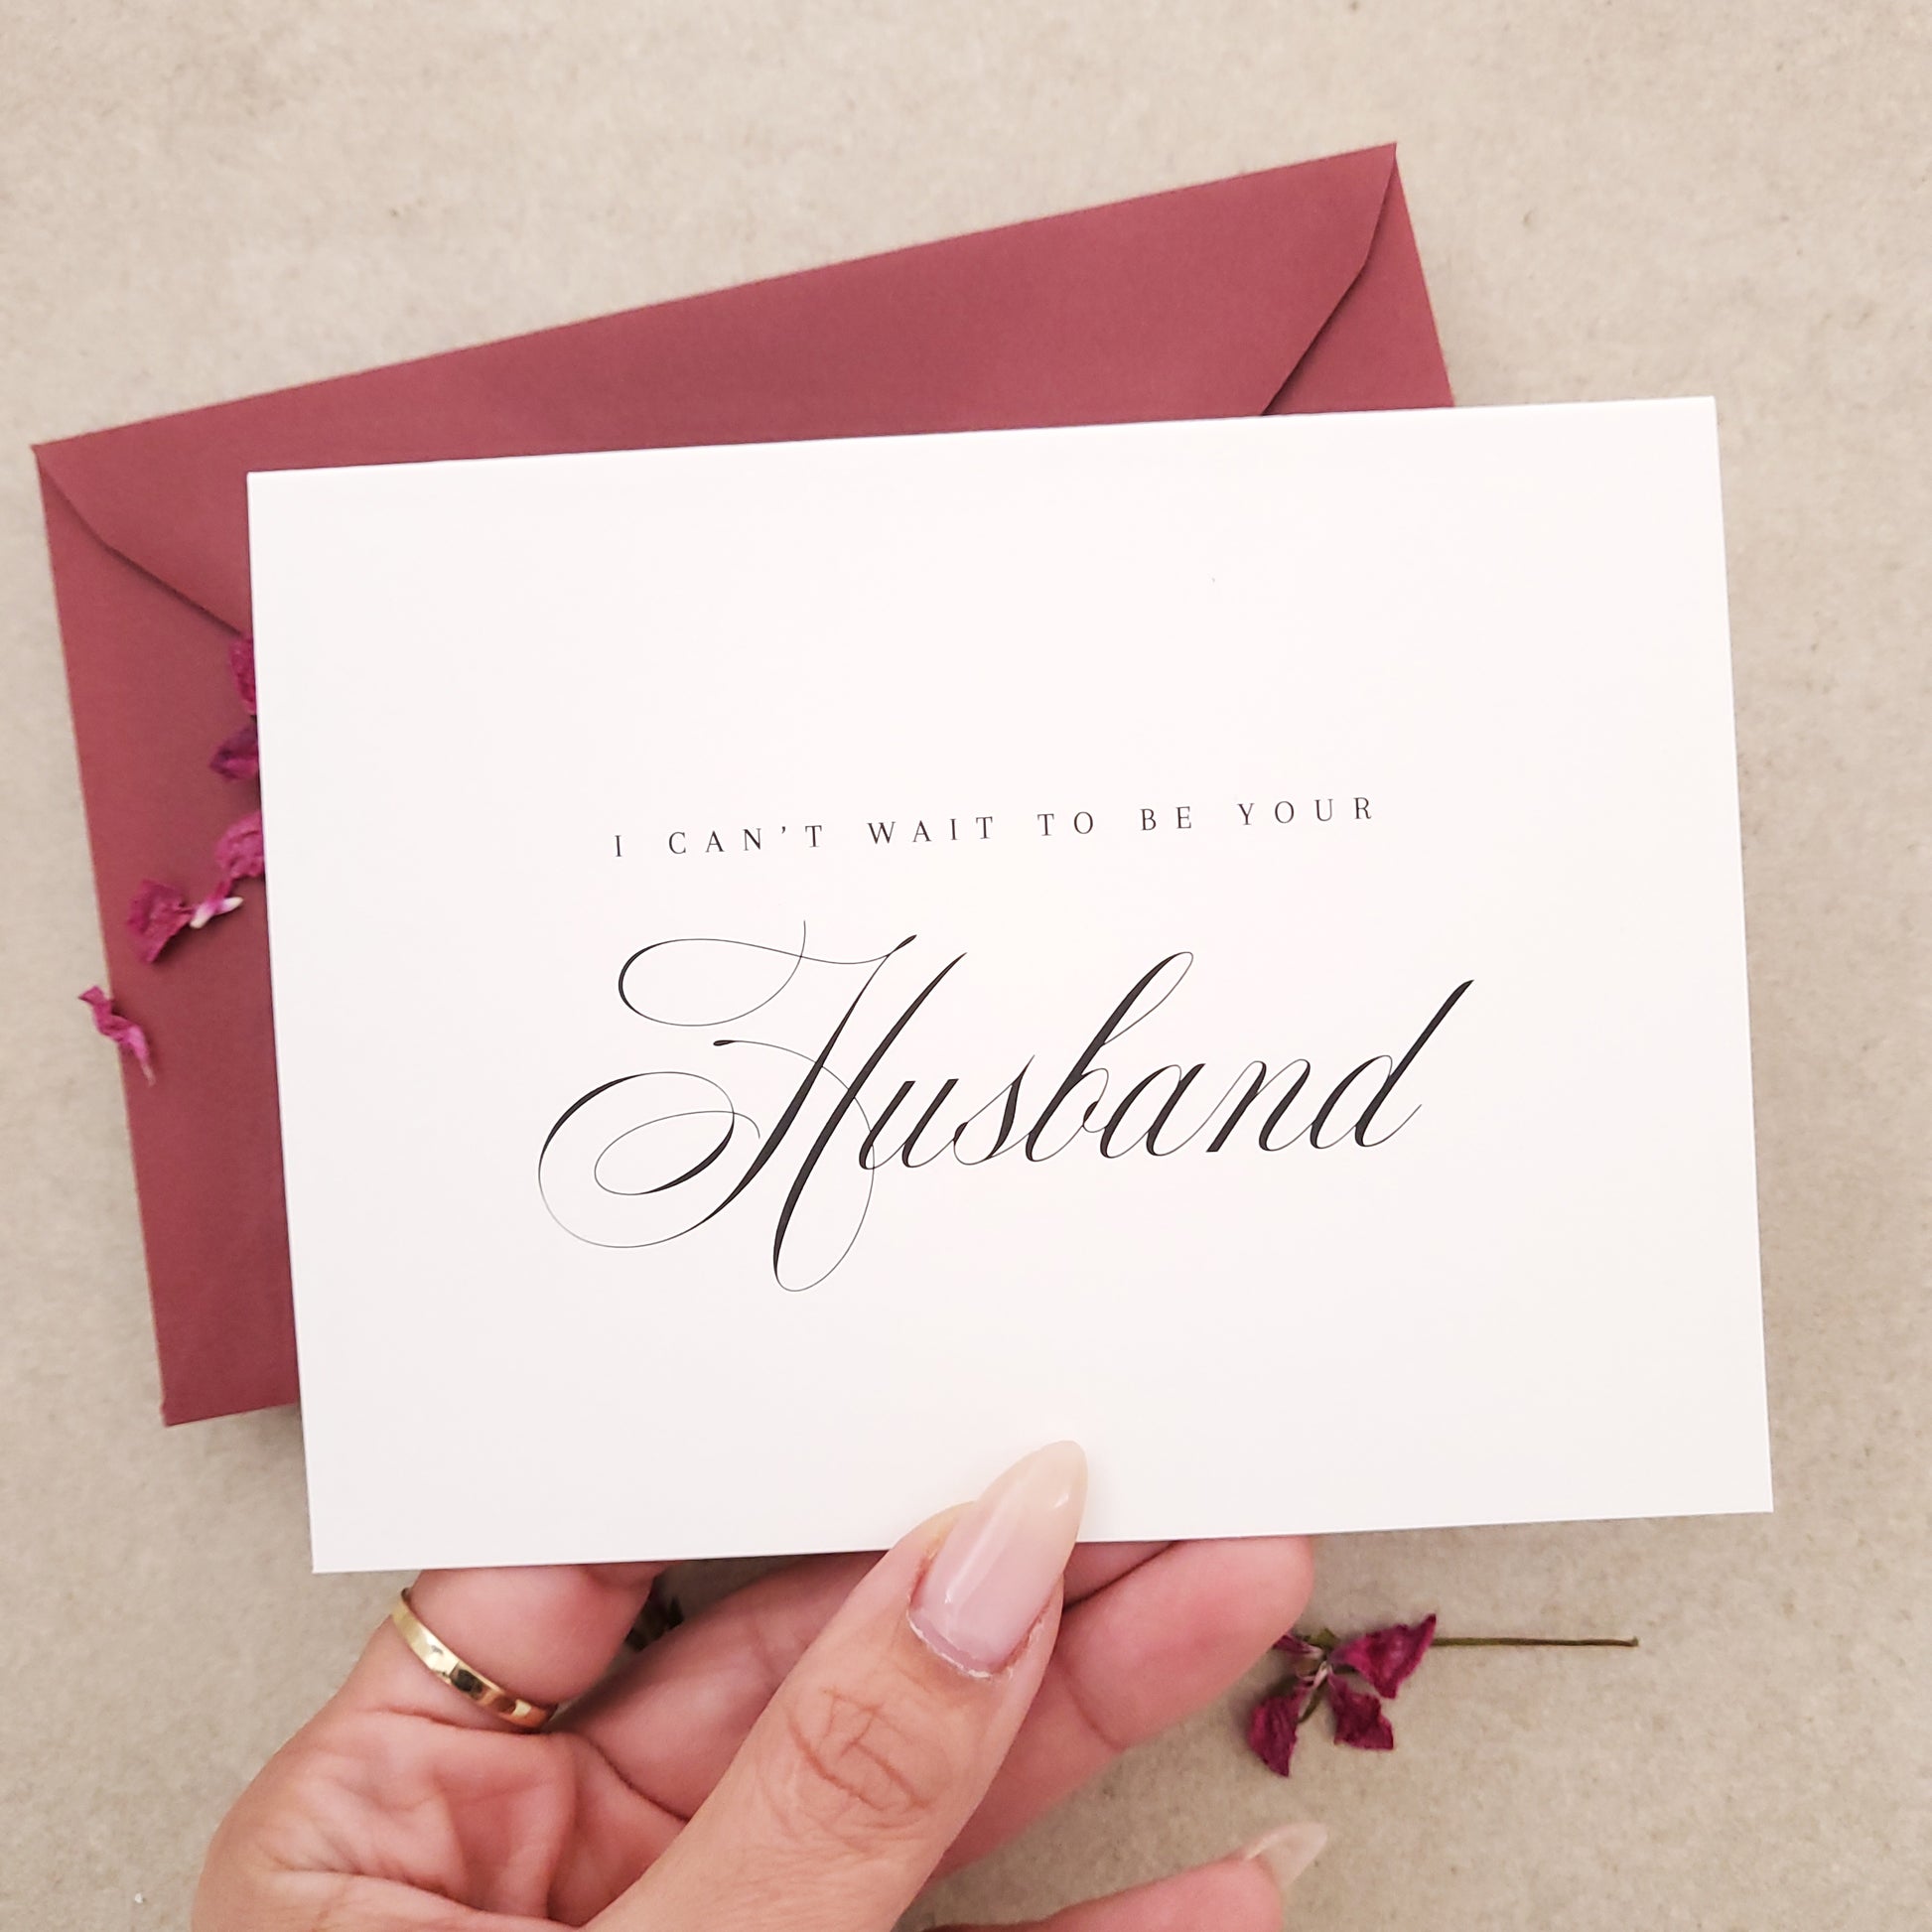 I can't wait to be your husband wedding day note cards - XOXOKristen